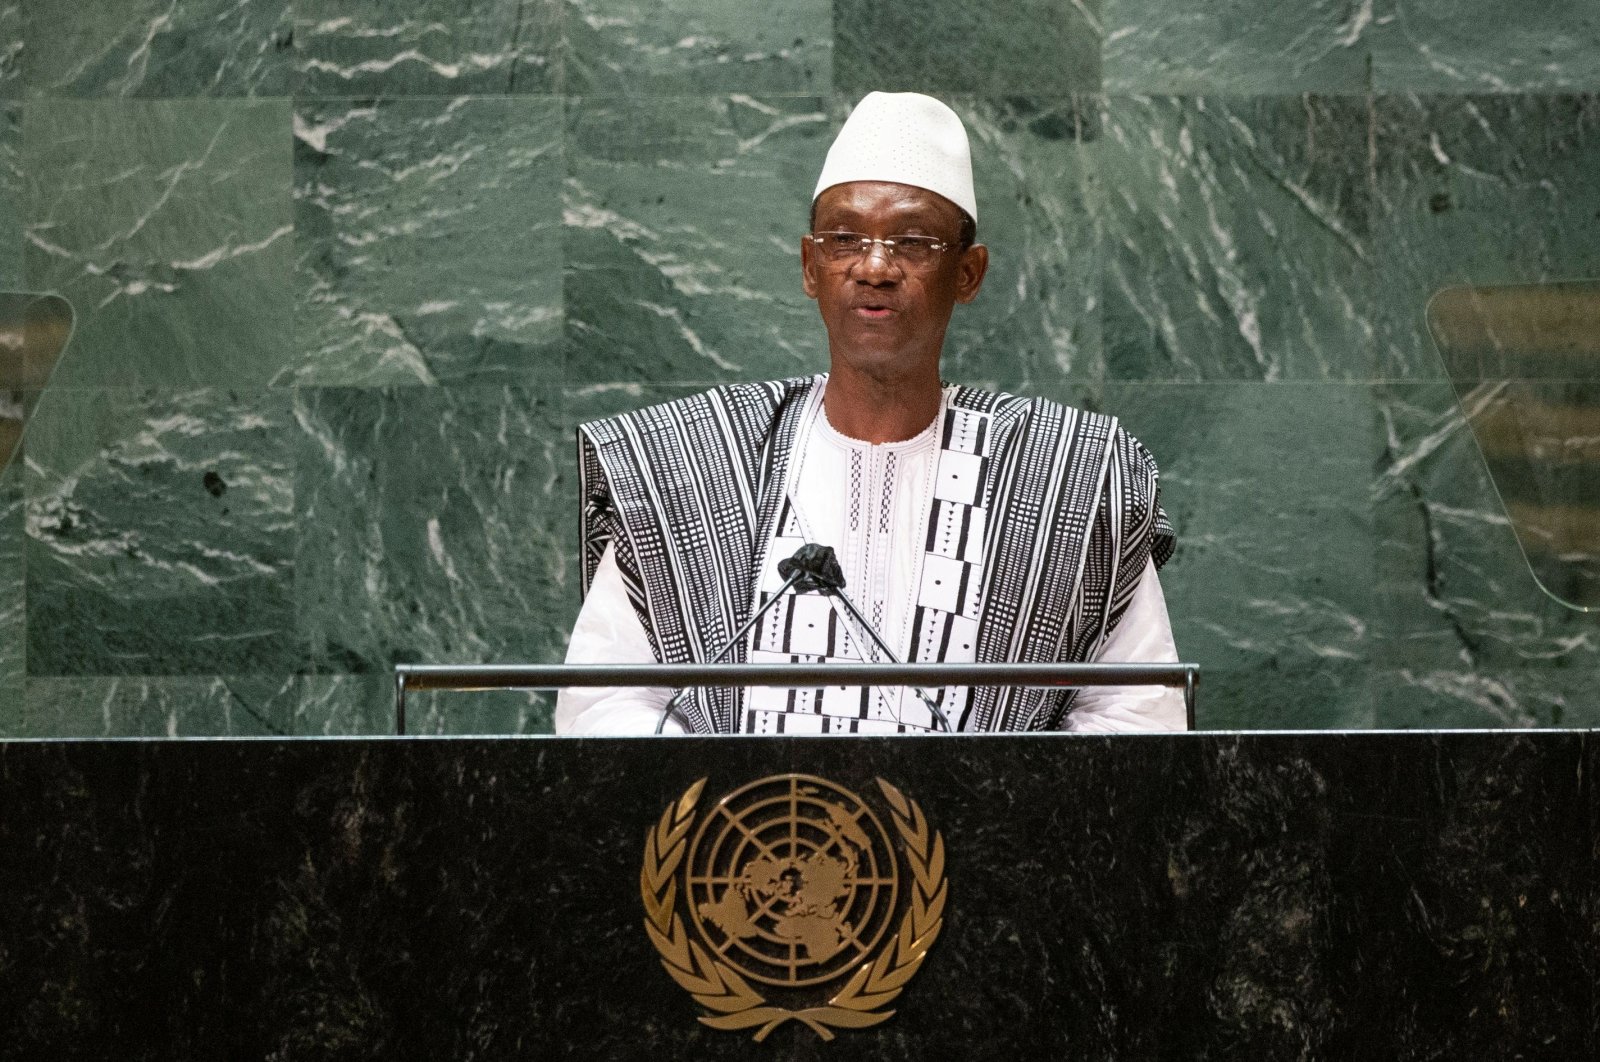 Mali's Prime Minister Choguel Kokalla Maiga addresses the 76th session of the United Nations General Assembly at the U.N. headquarters in New York City, U.S., Sept. 25, 2021. (Reuters Photo)